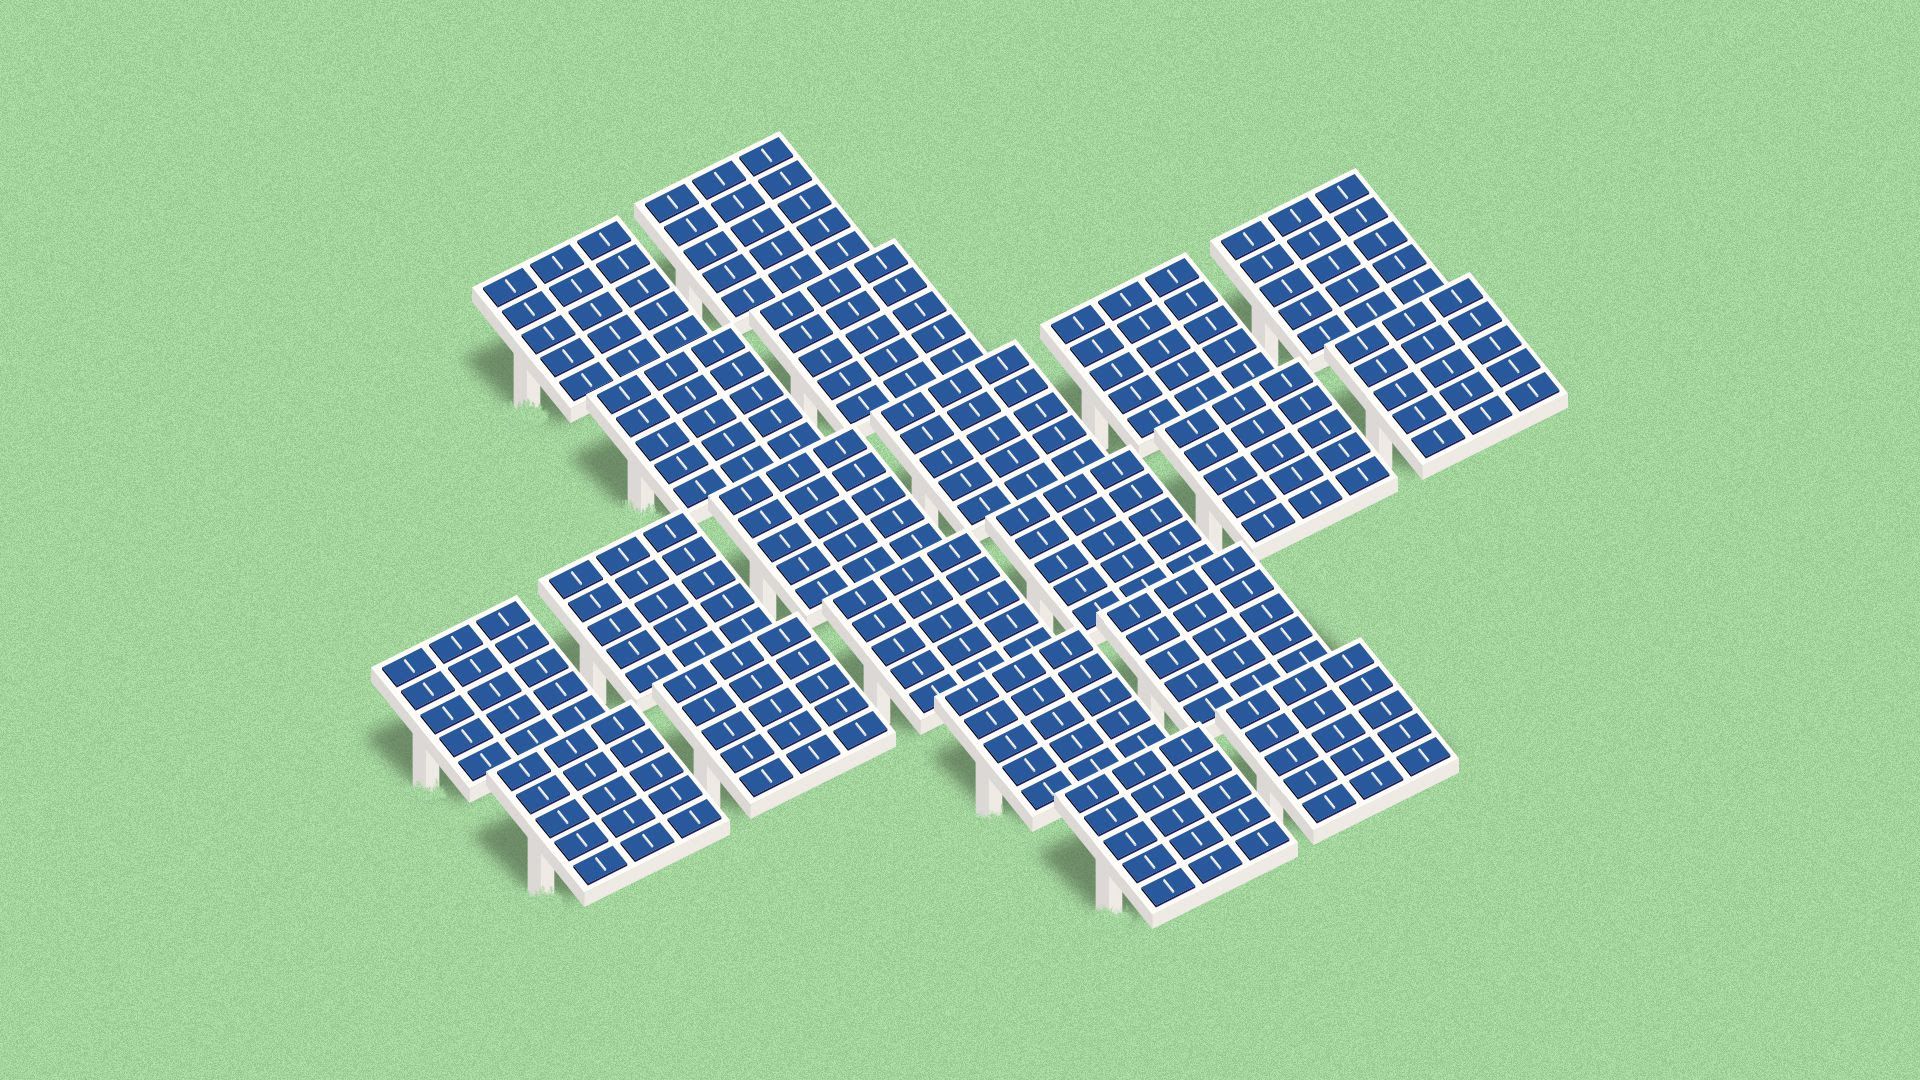 A cluster of solar panels 